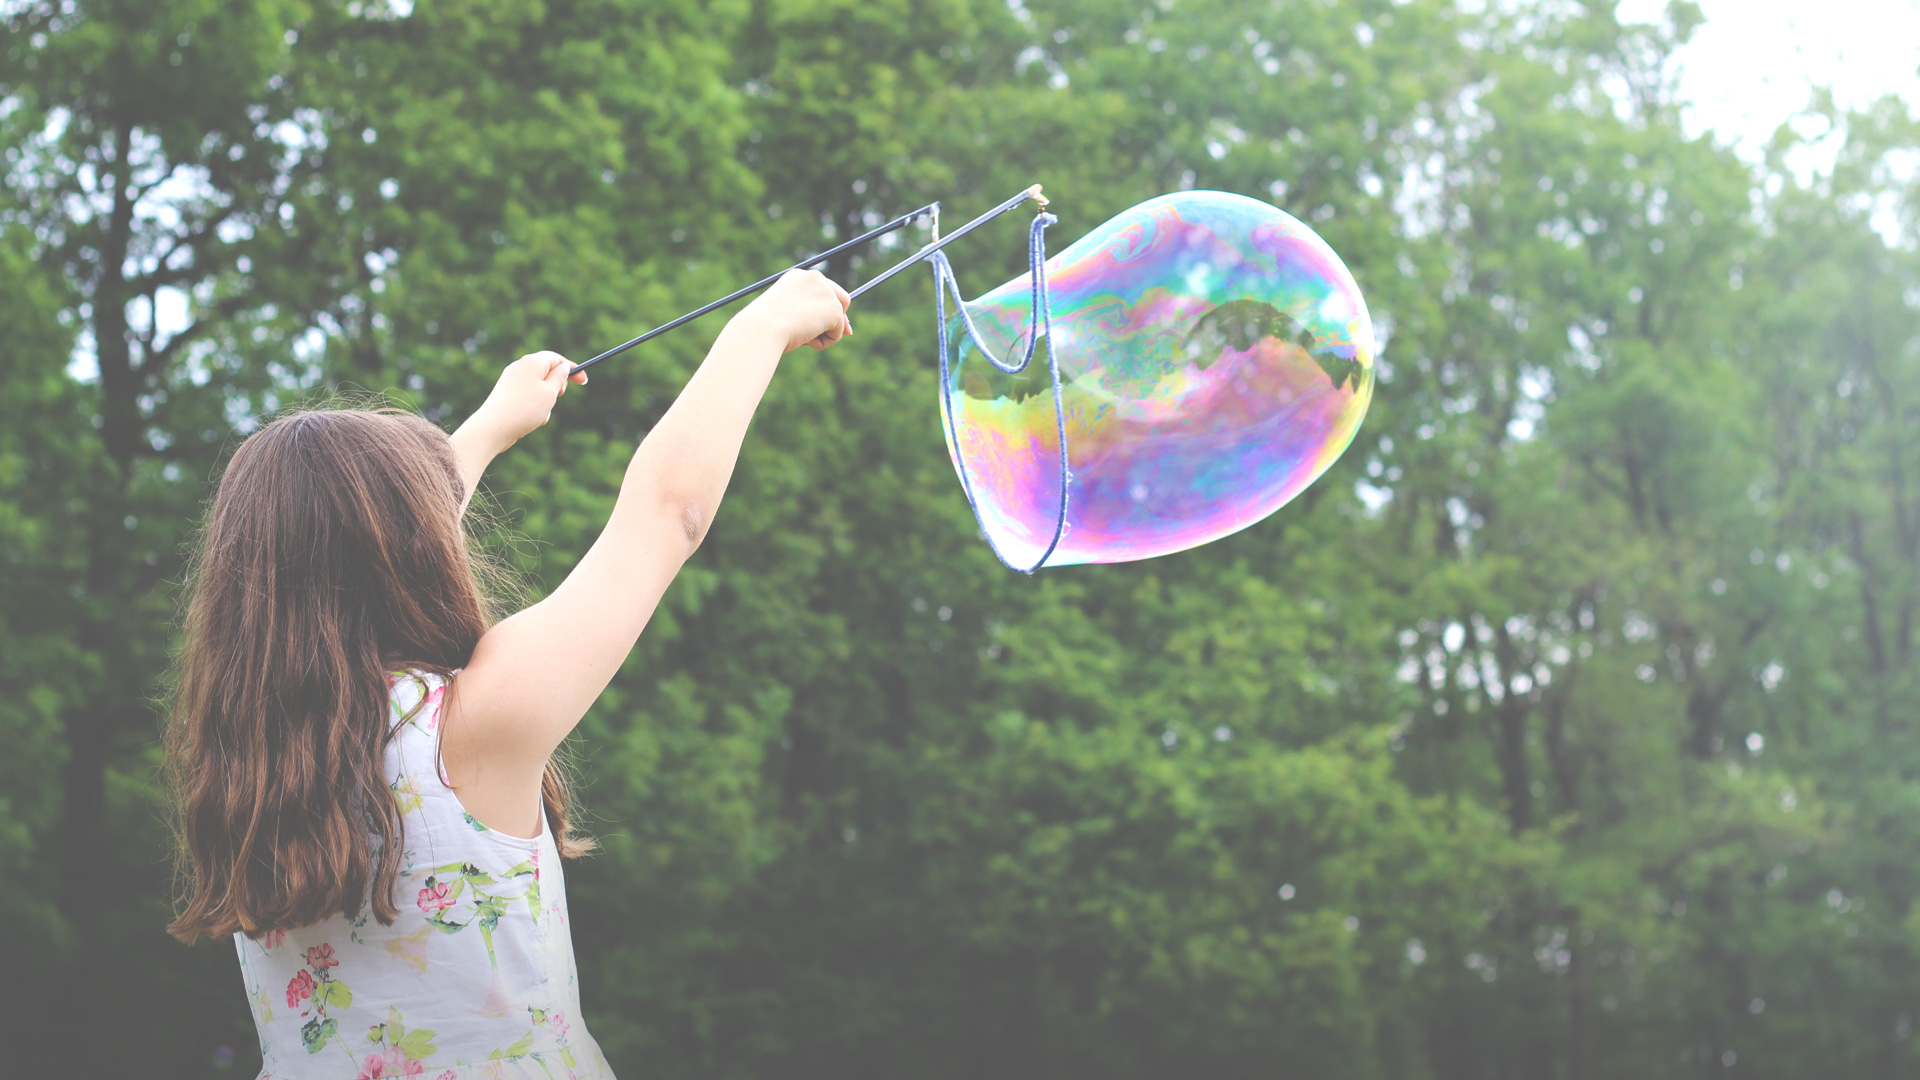 Young girl making a giant bubble